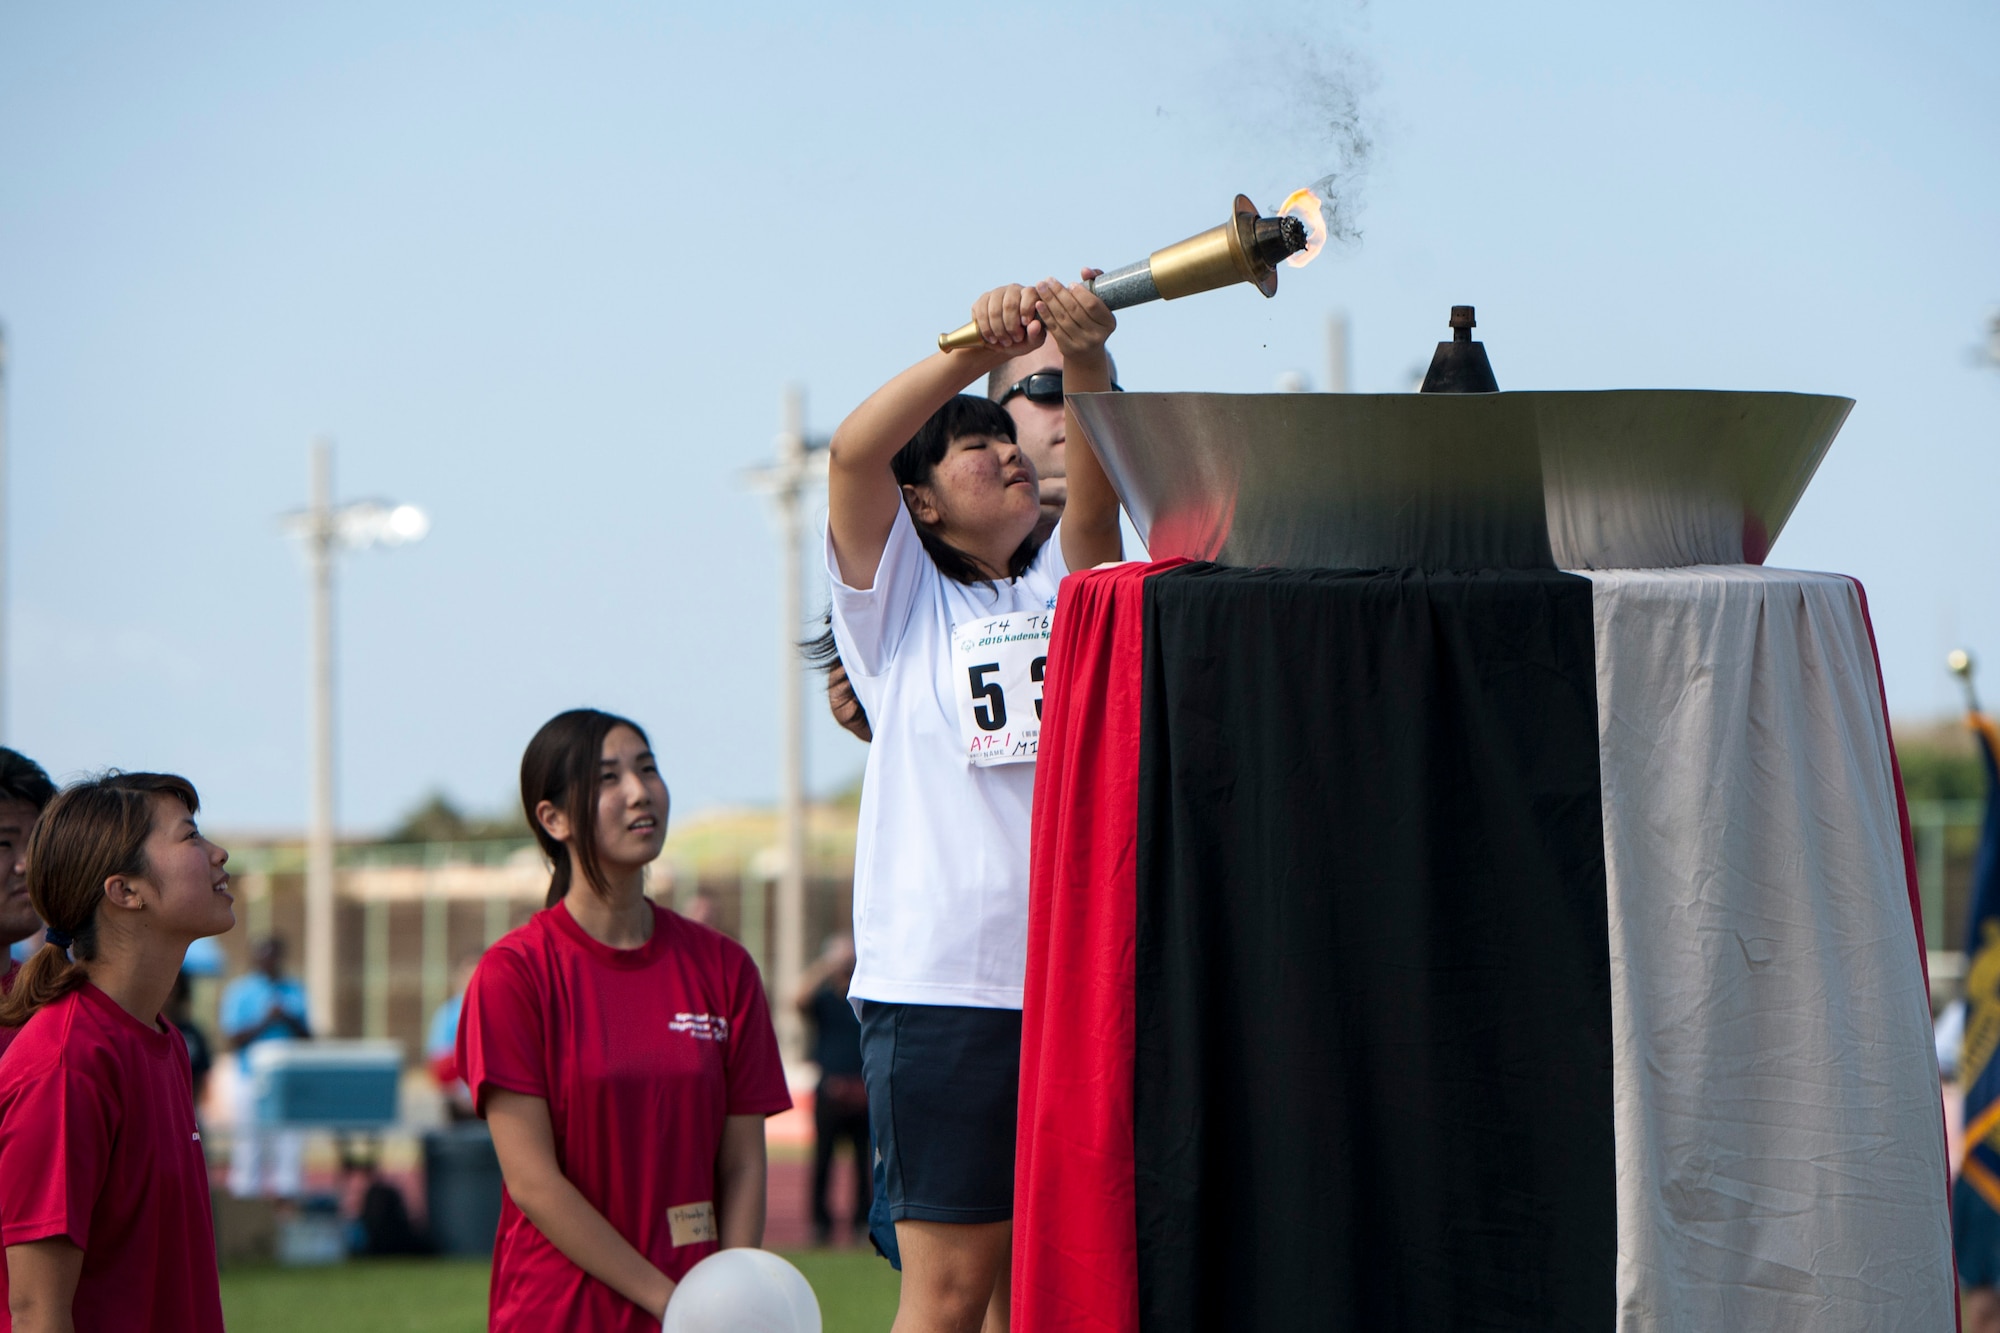 Miyuu, a special-needs athlete, lights the Olympic torch during the Kadena Special Olympics opening ceremony Nov. 5, 2016, at Kadena Air Base, Japan. Since the first time Kadena hosted the games in 2000, volunteers have highlighted inspiring acts of kindness, courage and team spirit from the athletes, family members and volunteers across the island. (U.S. Air Force photo by Senior Airman Peter Reft/Released)